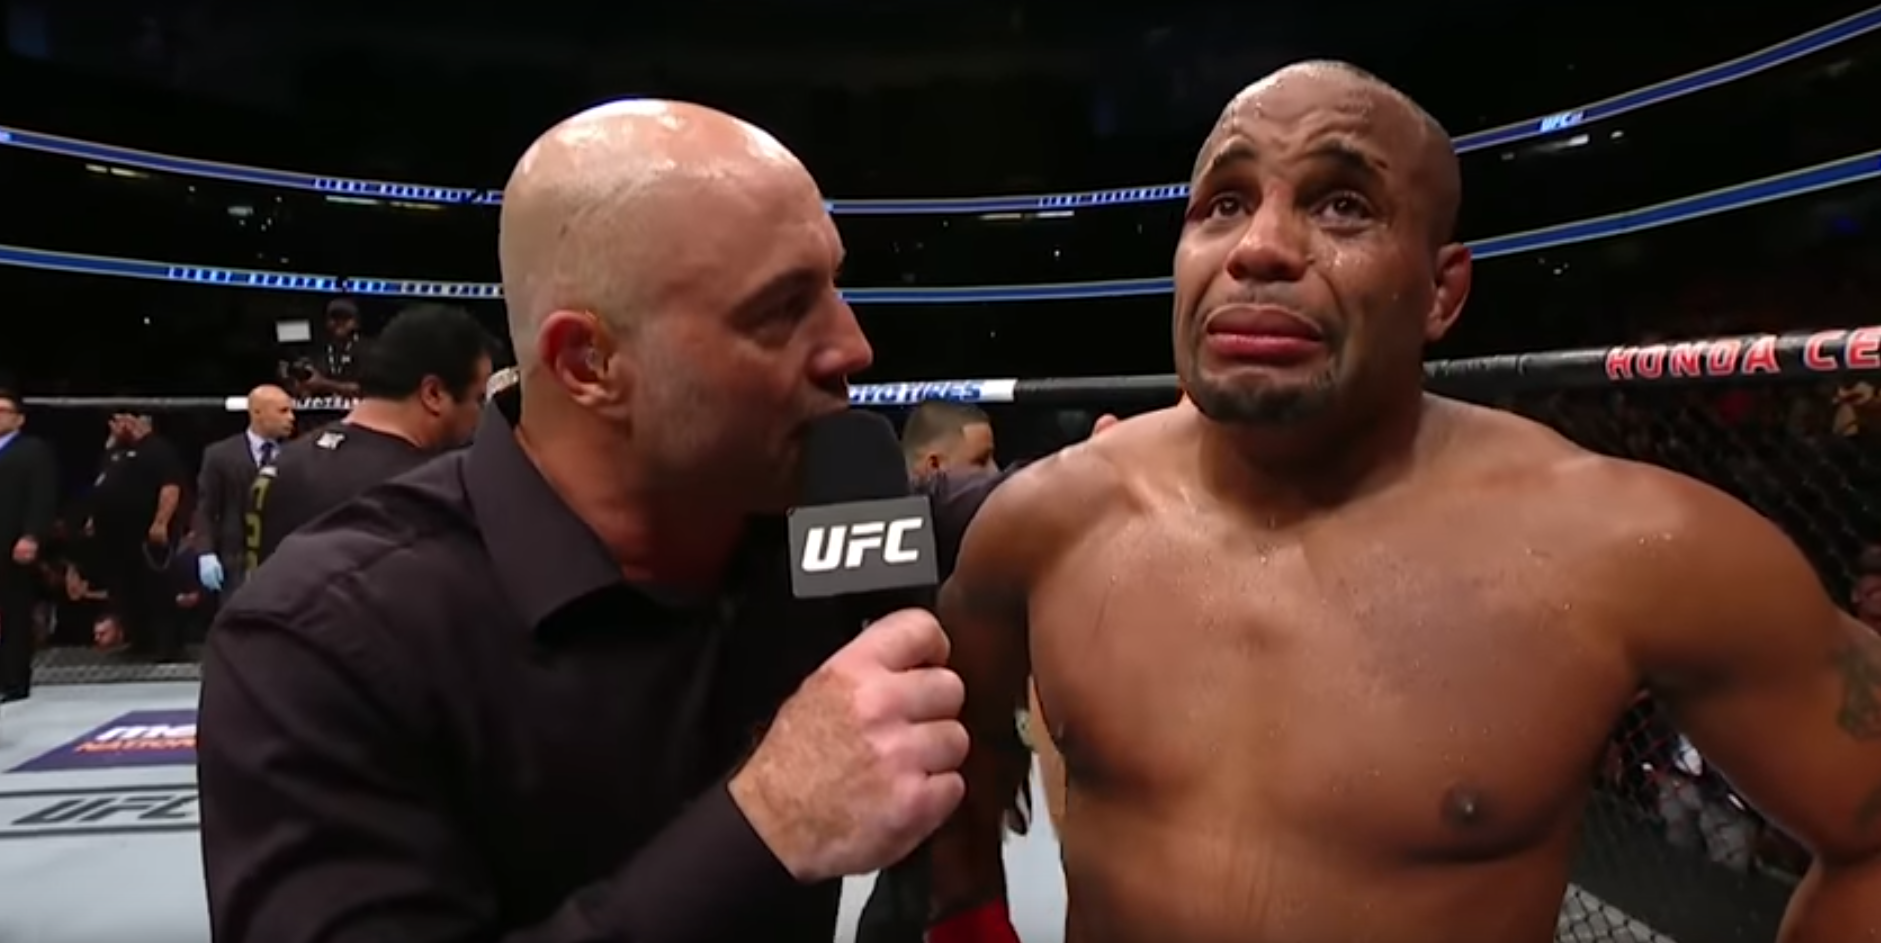 Joe Rogan Apologizes For Interviewing a Clearly Concussed Daniel